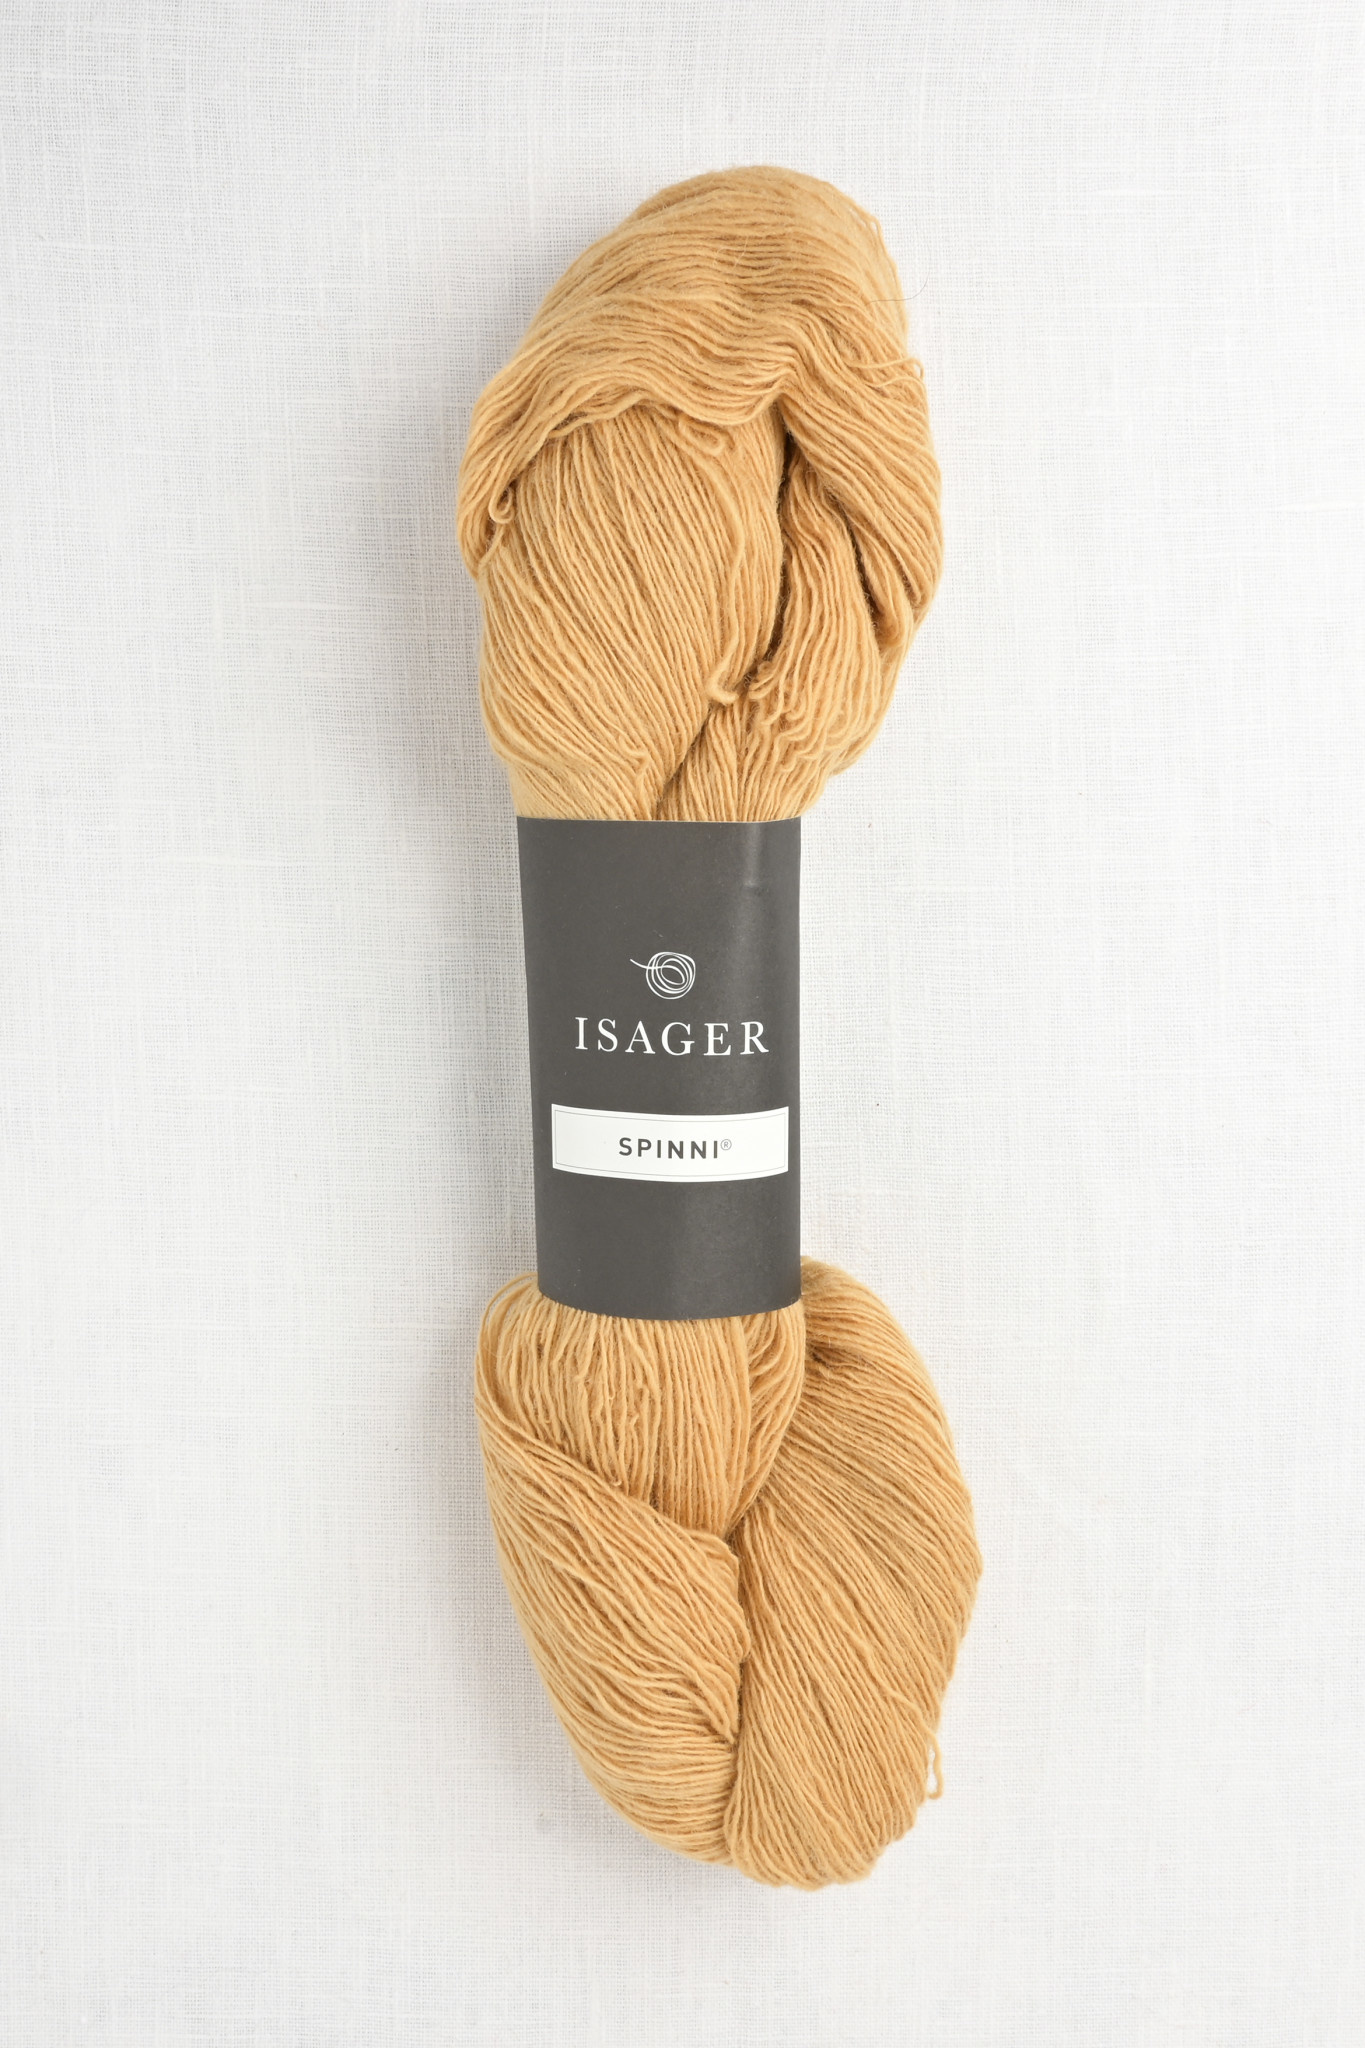 forbedre Gooey lektier Isager Spinni 59 Bale - Wool and Company Fine Yarn